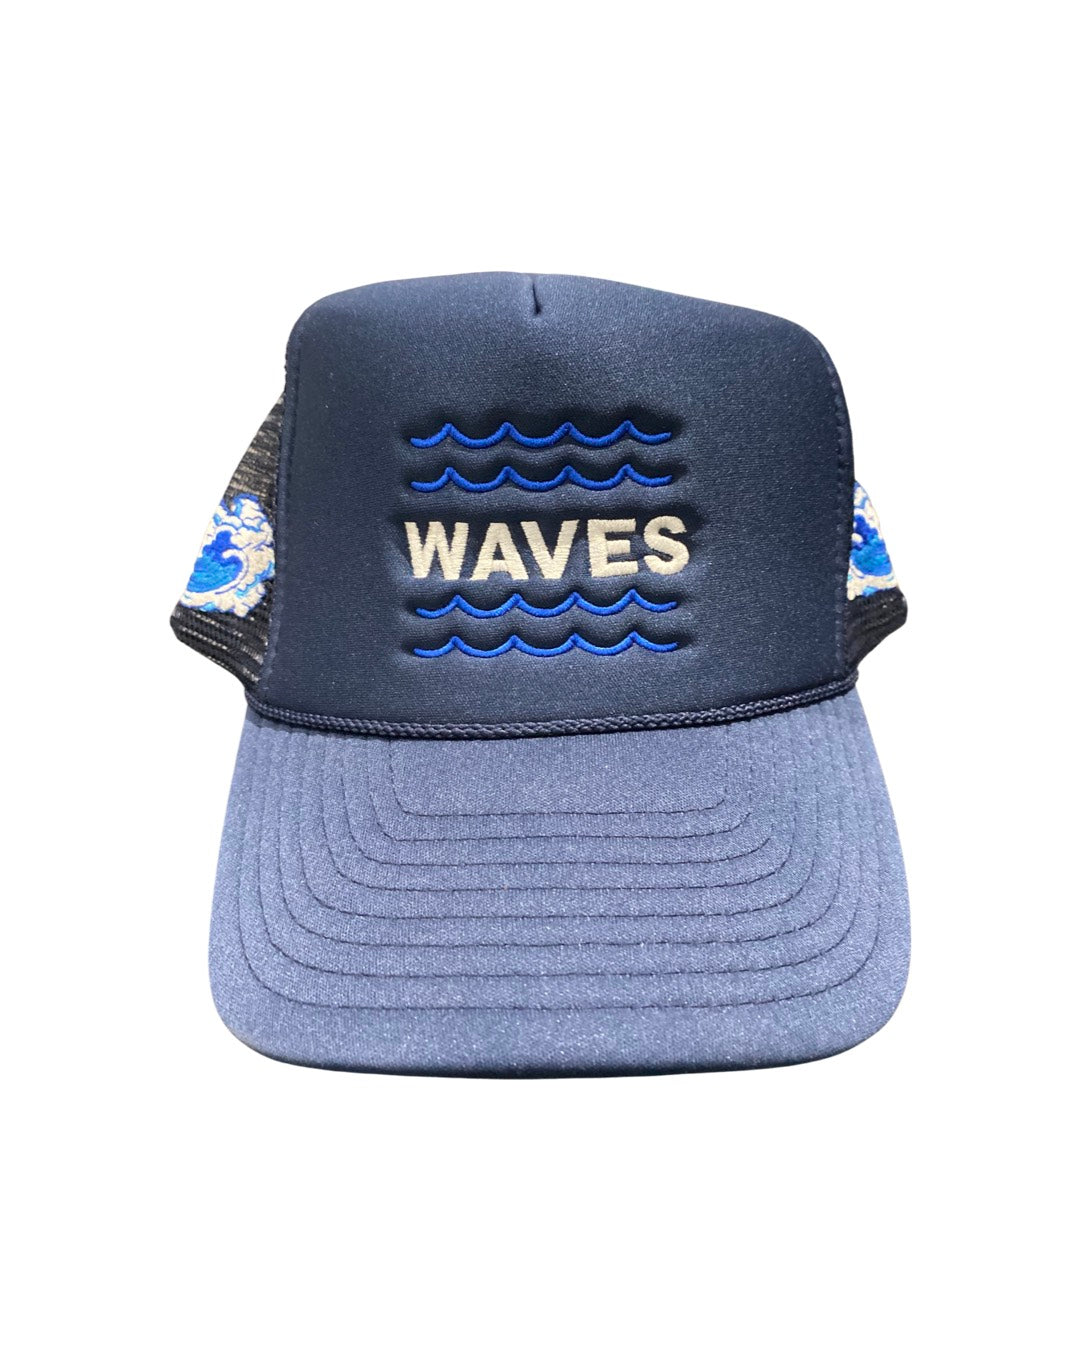 MPR CLOTHING NAVY RIDE THE WAVE TRUCKER HAT